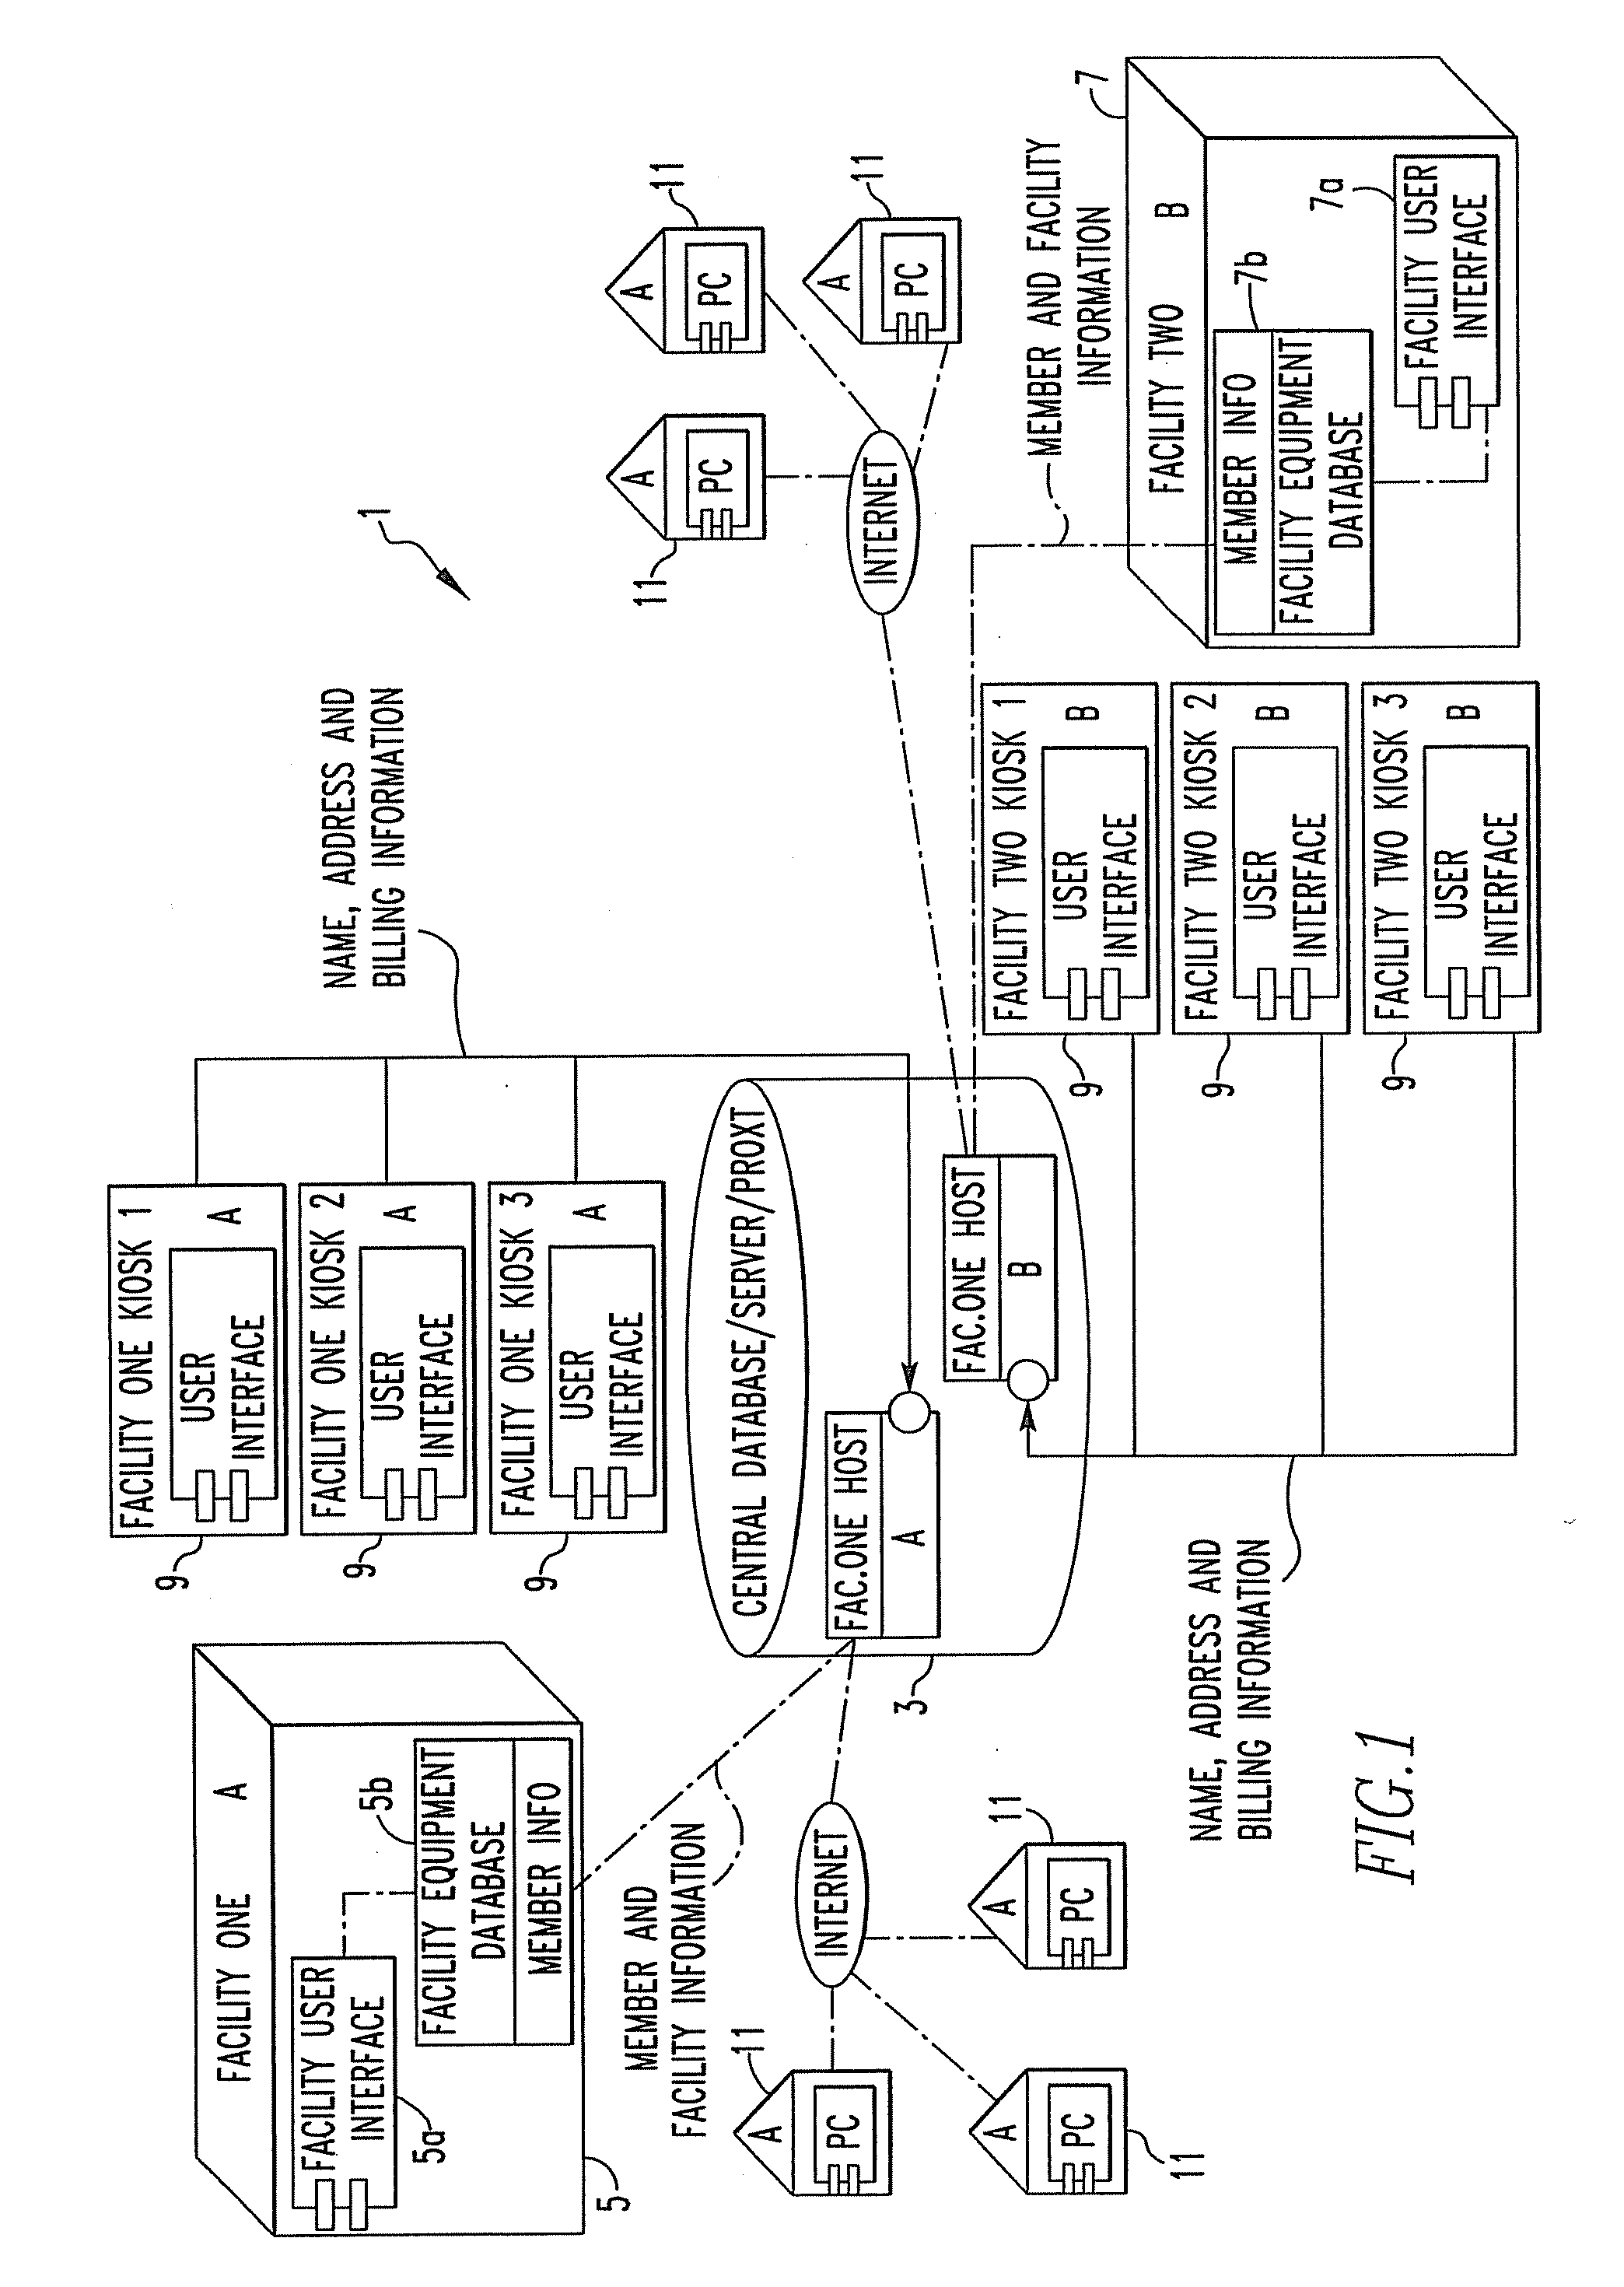 Educational Fitness and Health Training System and Method Having Research Capabilities